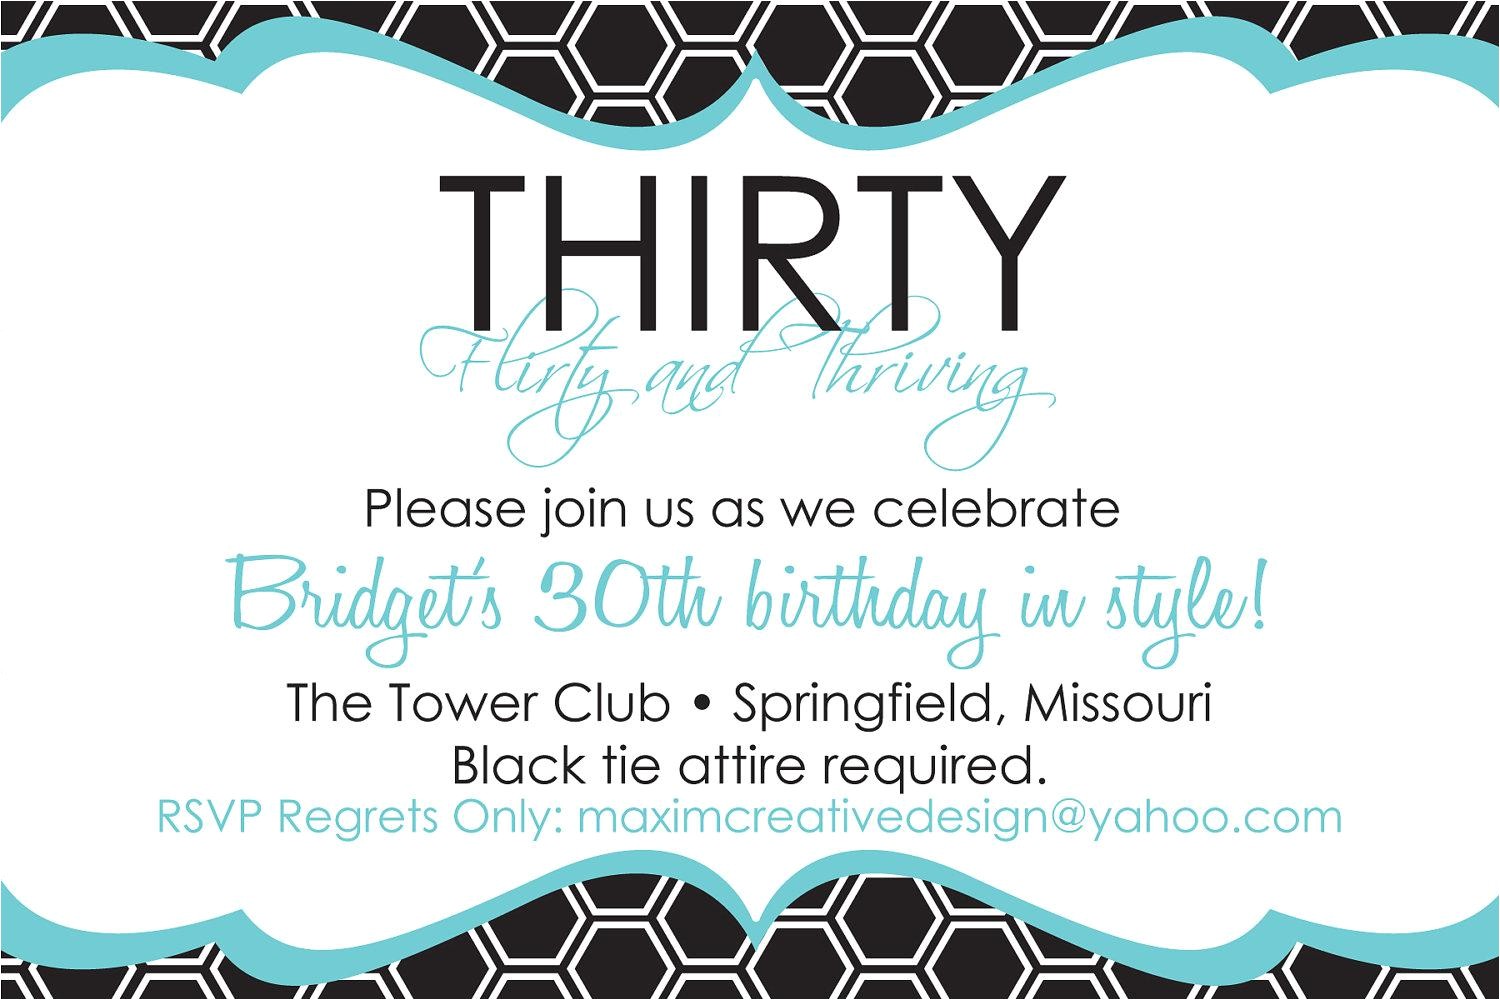 Funny Wording for 30th Birthday Party Invitation 20 Interesting 30th Birthday Invitations themes Wording